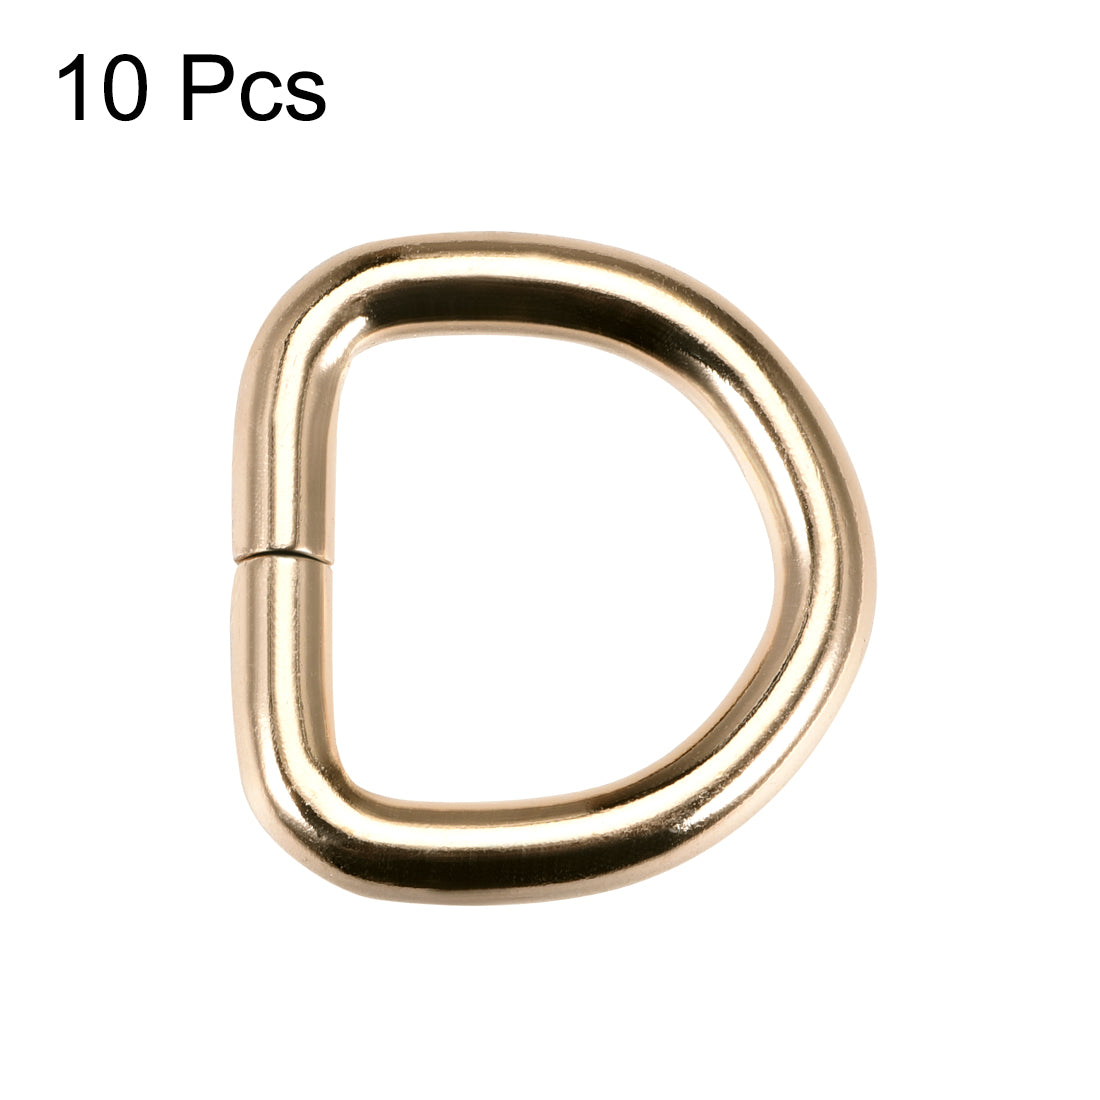 uxcell Uxcell 10 Pcs D Ring Buckle 0.8 Inch Metal Semi-Circular D-Rings Gold Tone for Hardware Bags Belts Craft DIY Accessories